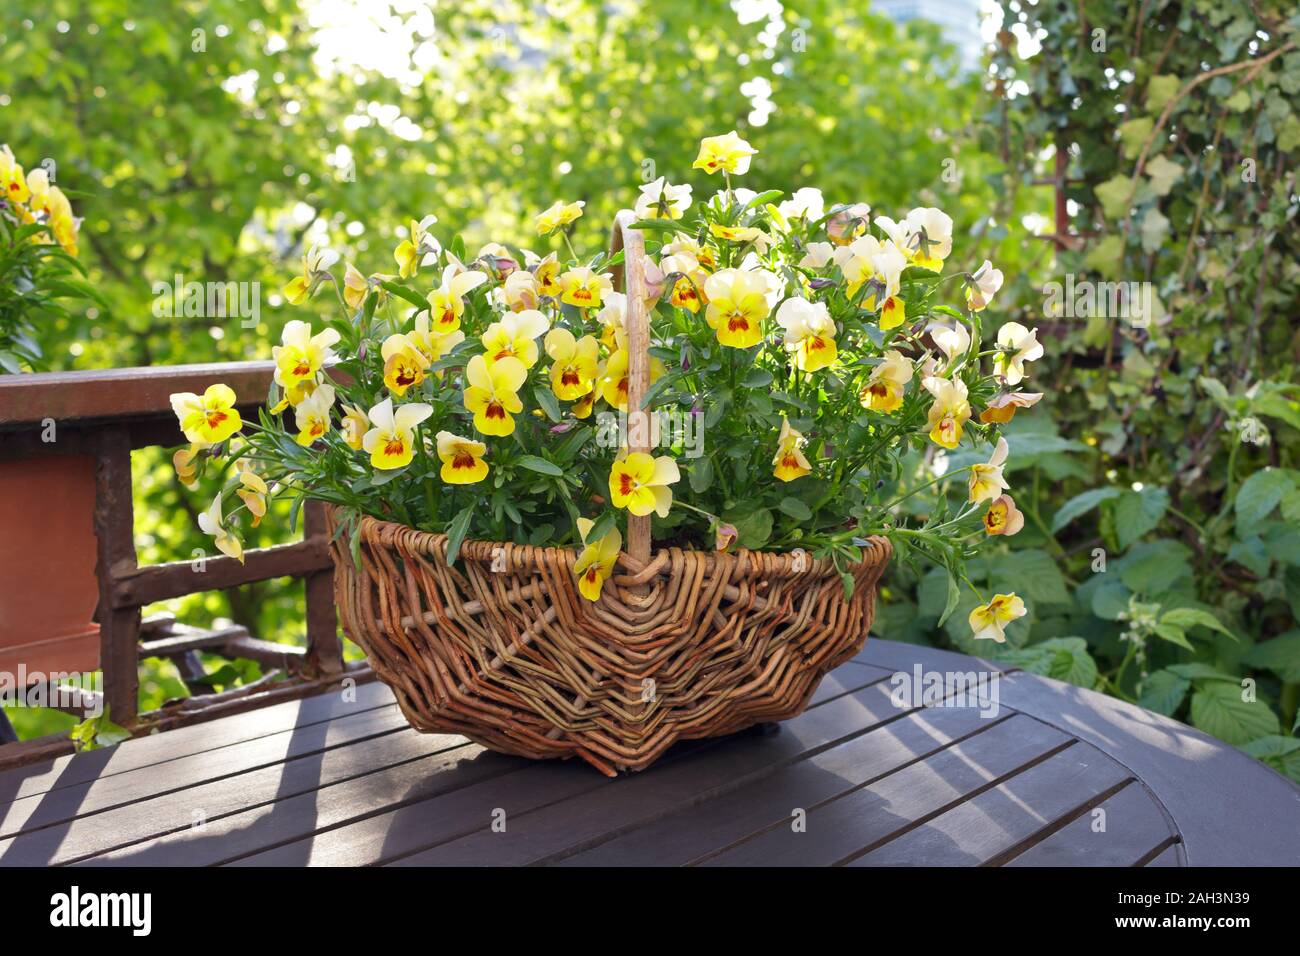 Yellow horned pansy flowers in a wicker basket on a balcony or garden table in bright morning sunlight. Stock Photo